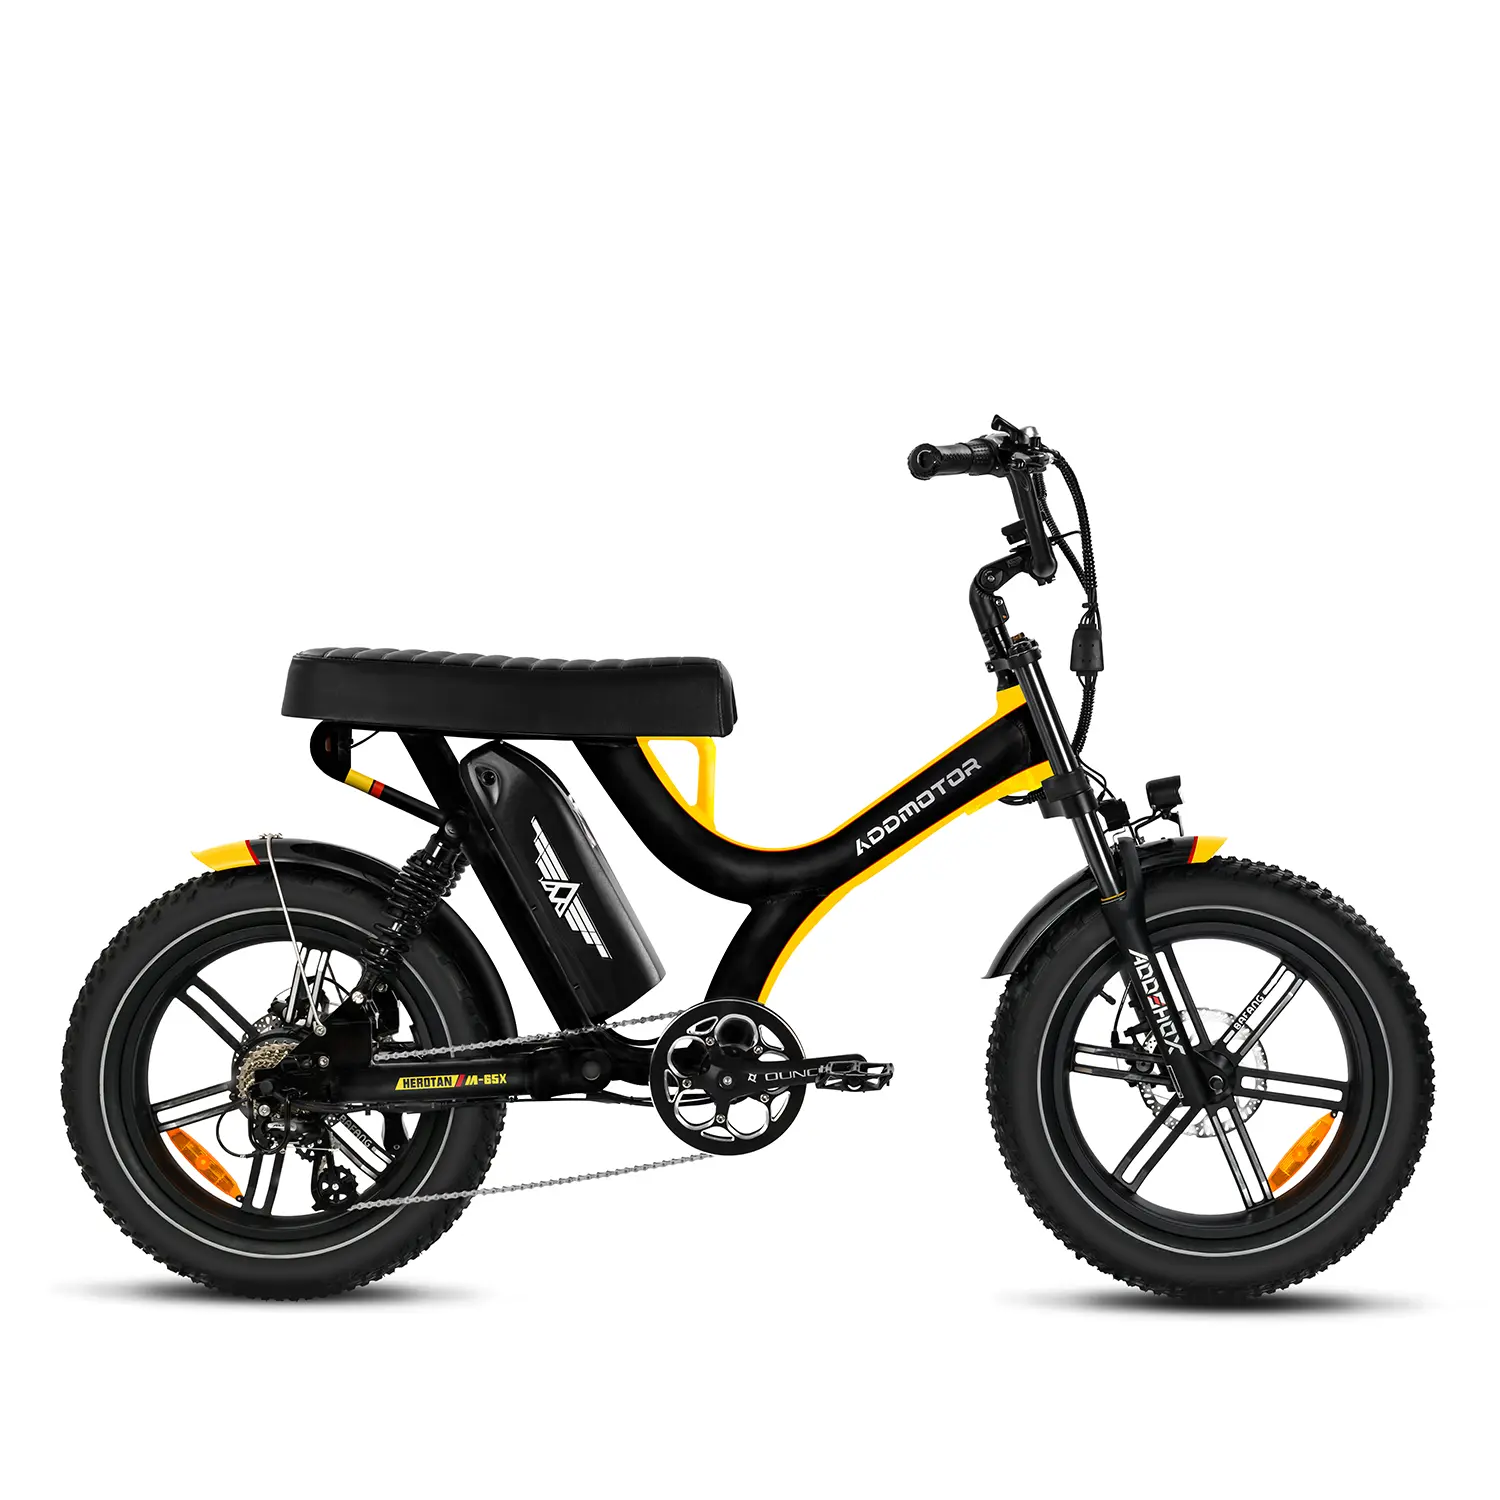 Addmotor HEROTAN M-65X Moped Electric Bike Full Suspension, 48V20Ah Long Range Battery up to 105+ Miles per Charge, Yellow